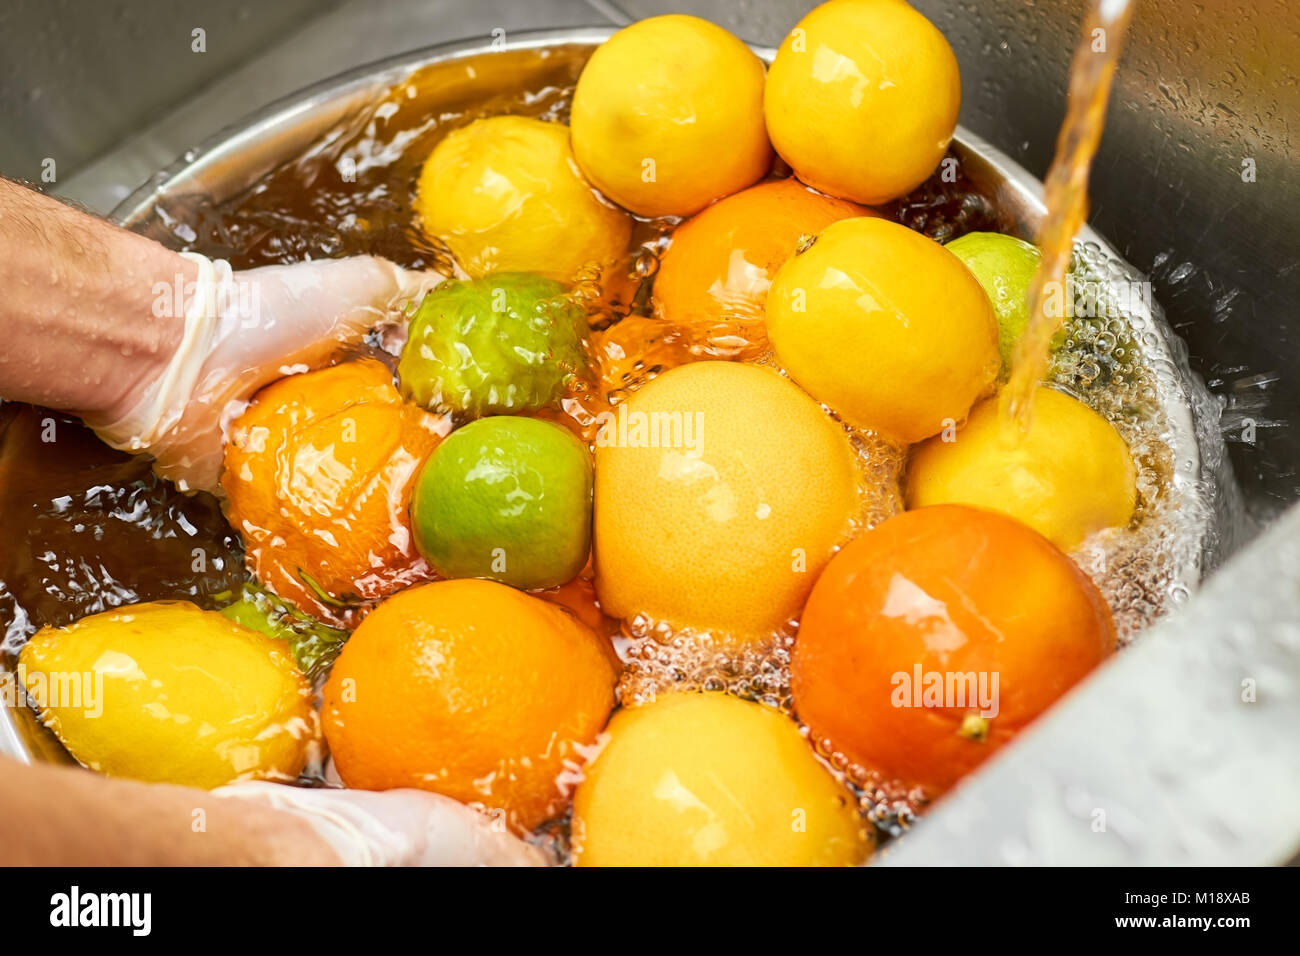 Plenty of citrus fruits in a metal bowl full of water under tap water. Stock Photo